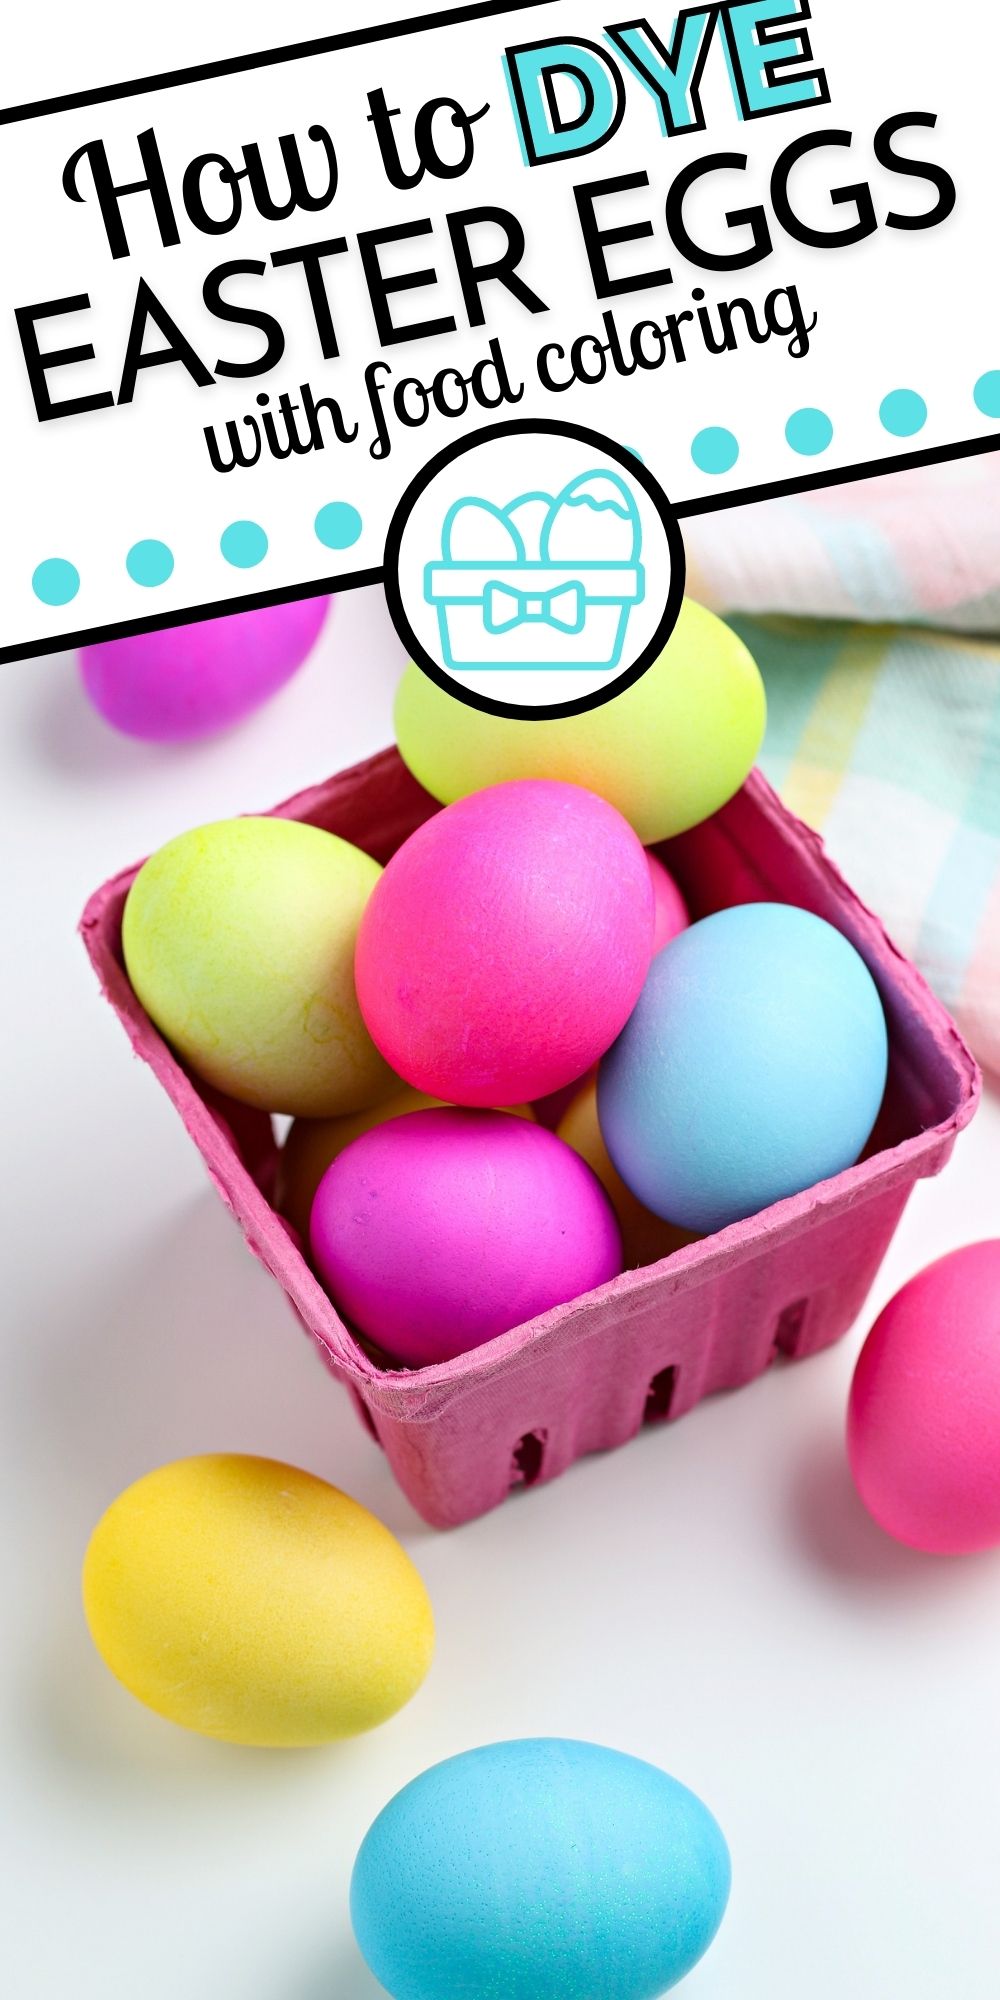 Learn How to Dye Easter Eggs with Food Coloring in this easy tutorial. Ditch the Easter eggs dyeing kit and do it from scratch instead!  via @foodfolksandfun